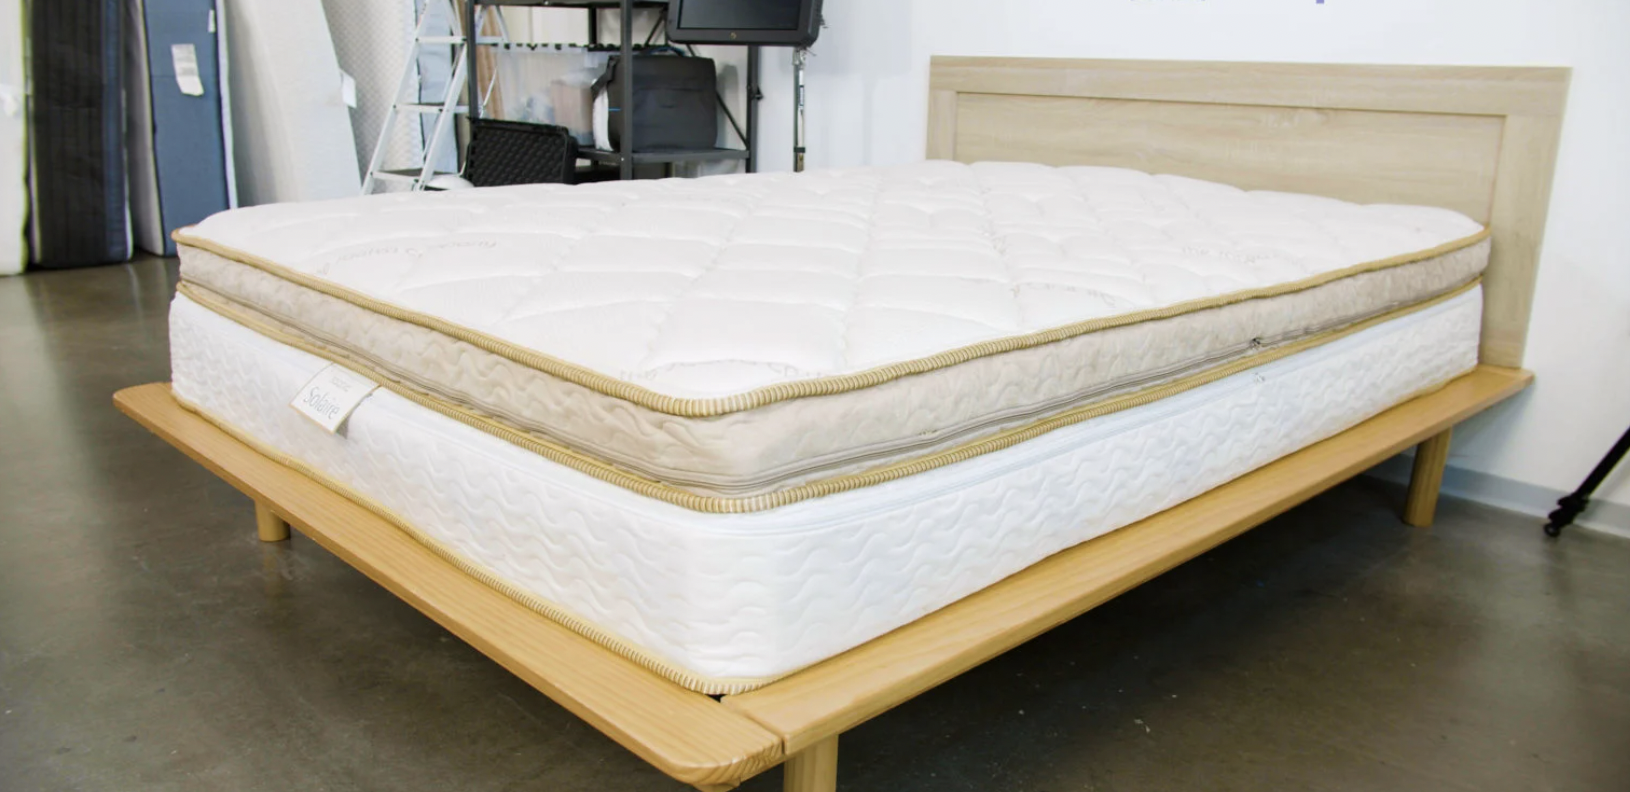 How to Keep a Mattress from Sliding - eachnight